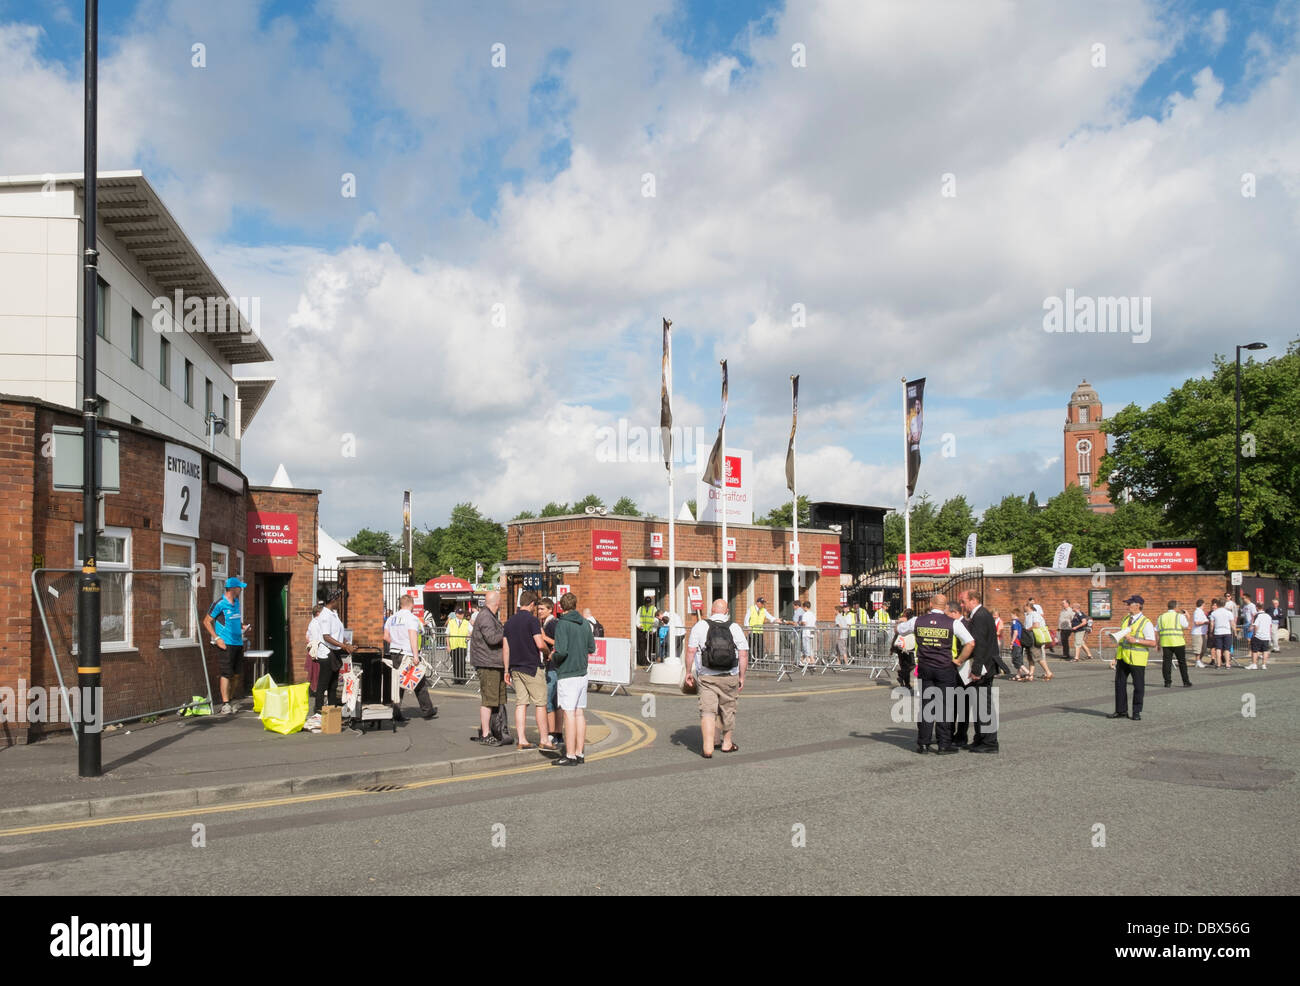 People arriving at Brian Statham Way entrance to Emirates Old Trafford at Lancashire County Cricket Ground for Ashes Test Match Stock Photo